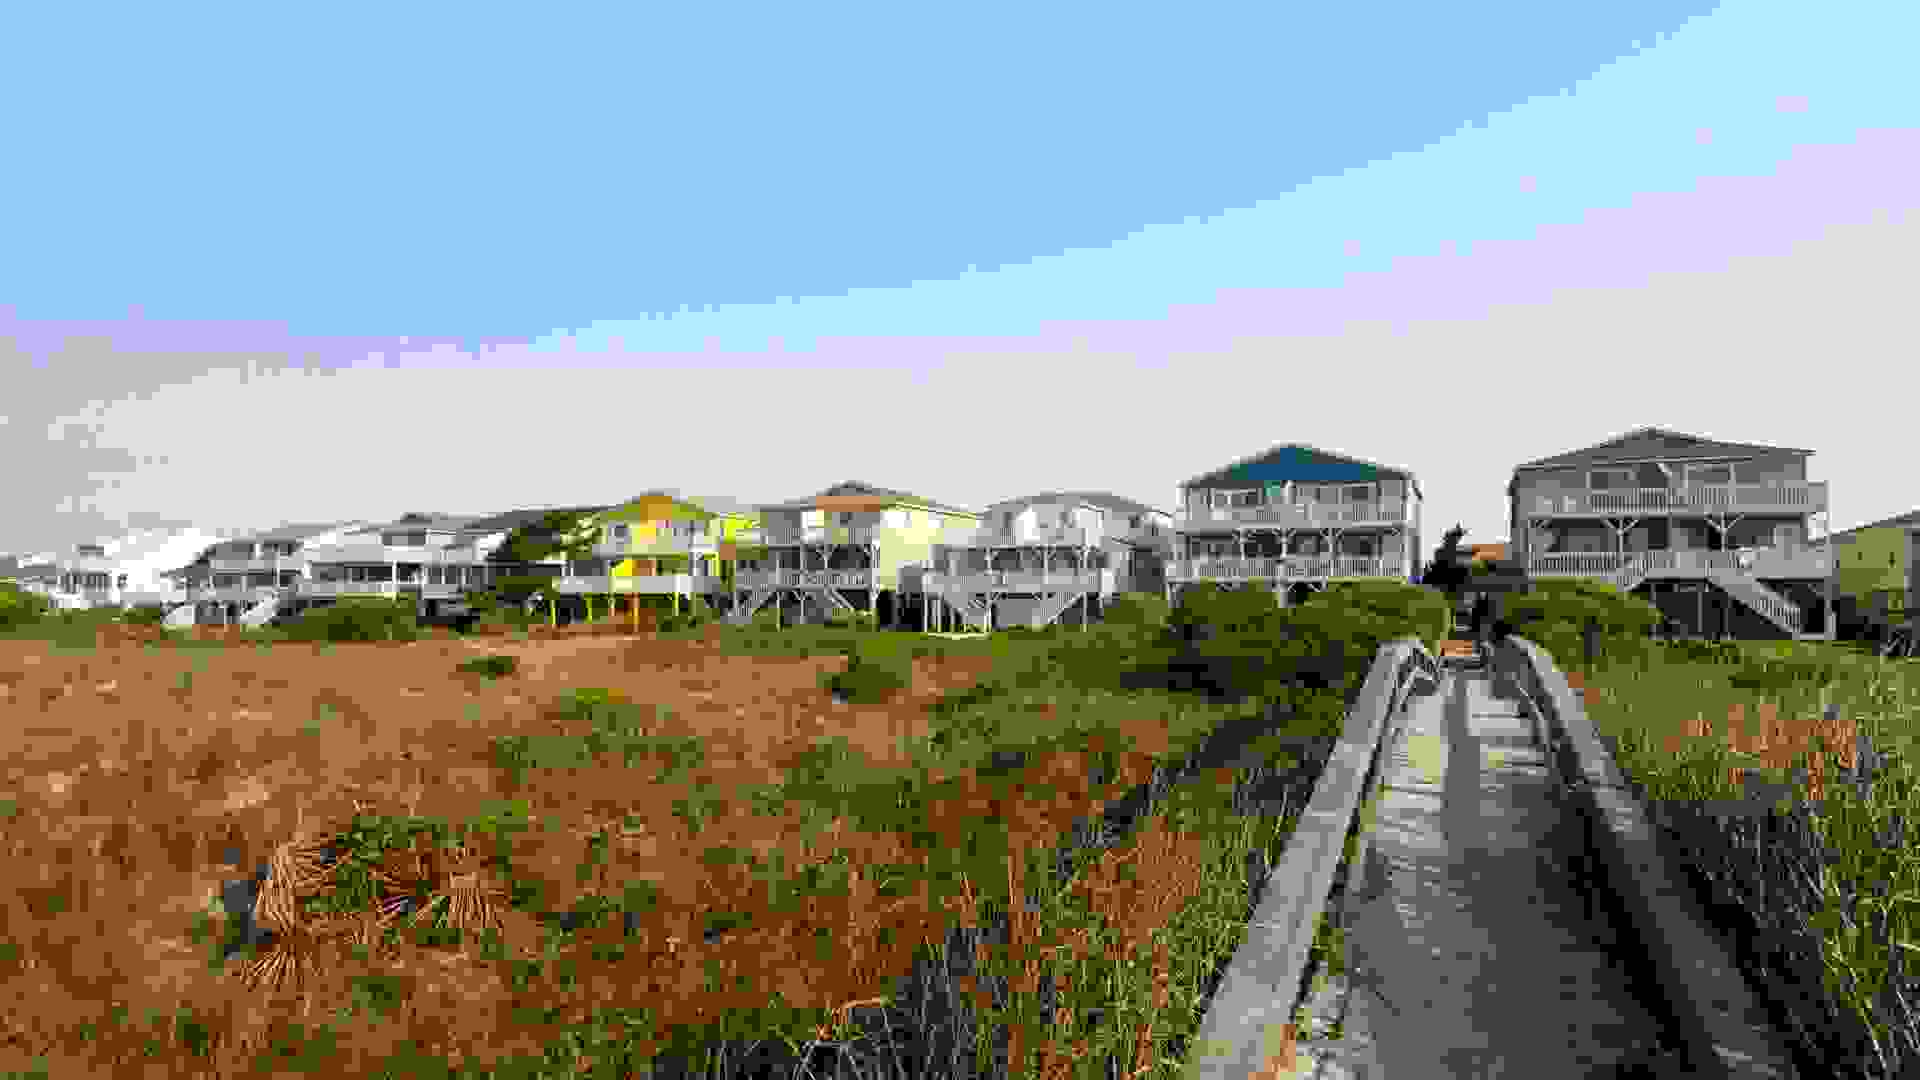 Beach houses across the green sand dunes with a long wooden walkway, Sunset Beach, North Carolina.